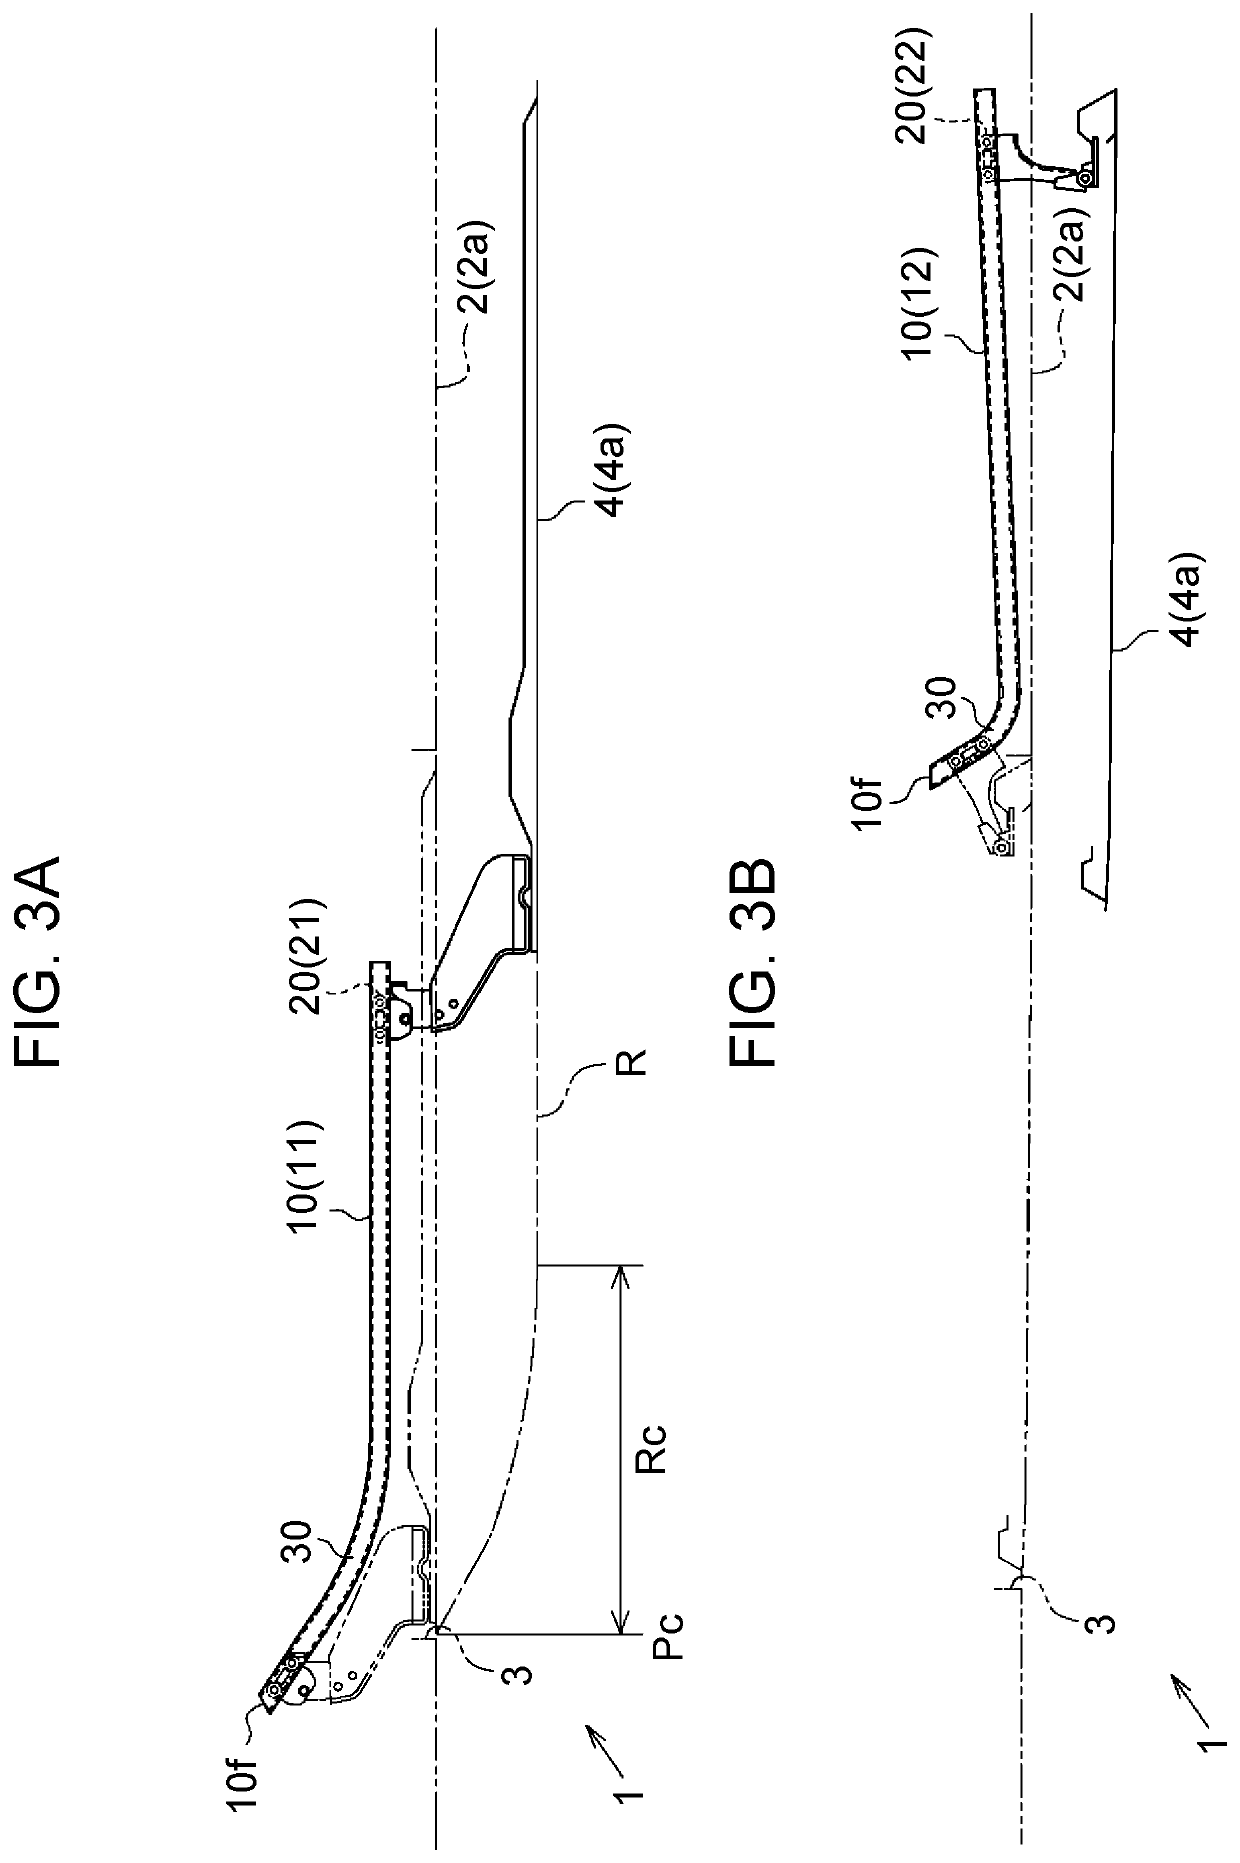 Step device for vehicle